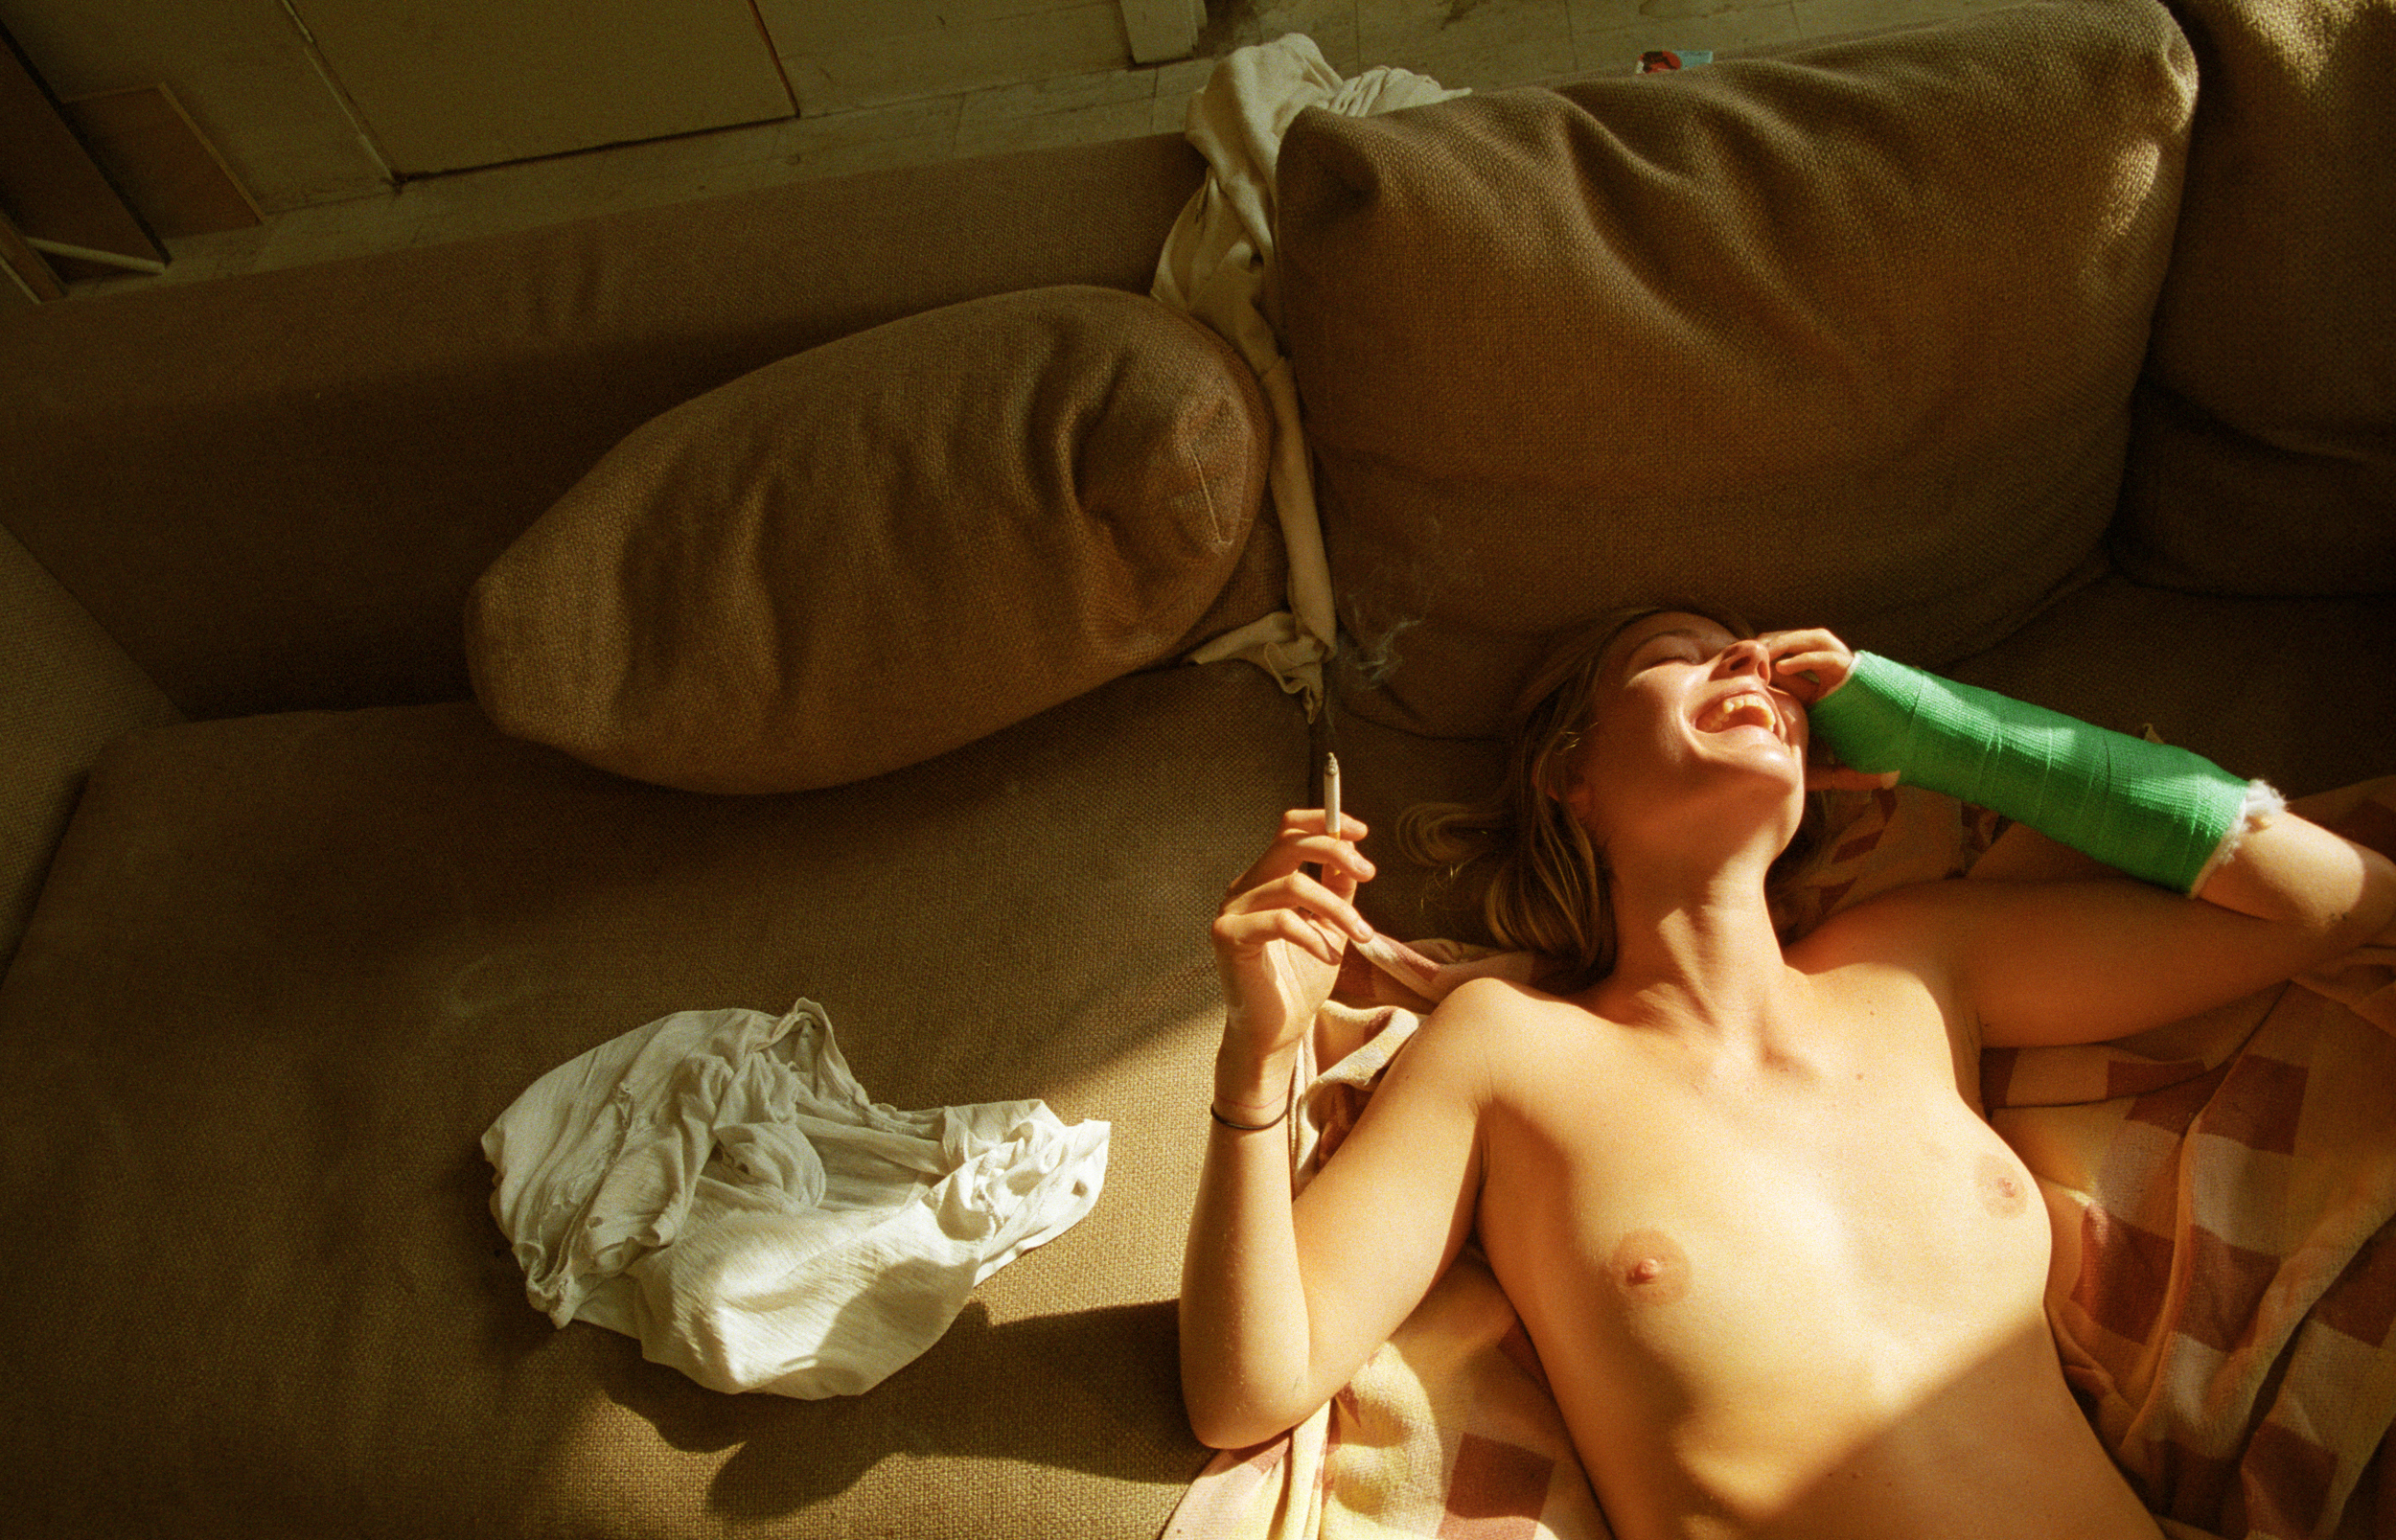 a person with a green cast on his arm laughs while smoking a cigarette and lying topless on his couch